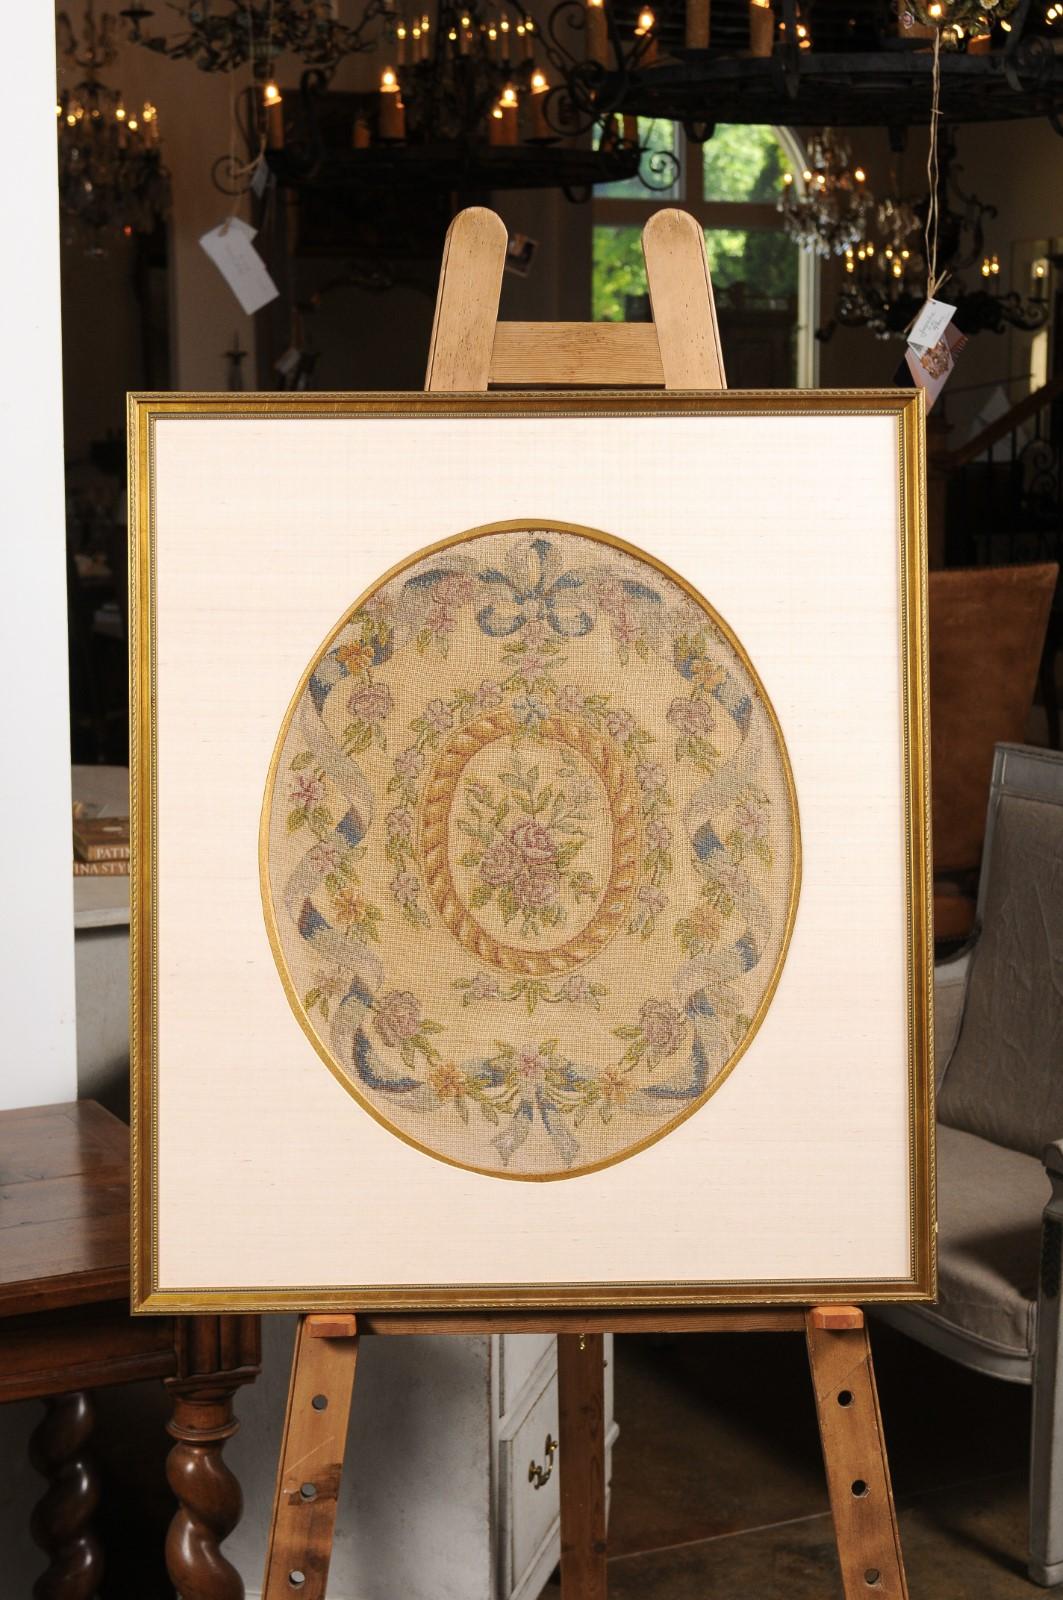 A French Aubusson floral oval tapestry from the 19th century with carved rectangular giltwood frame. Born in the famous Aubusson manufacture located in central France during the 19th century, this framed tapestry features a floral decor depicting a